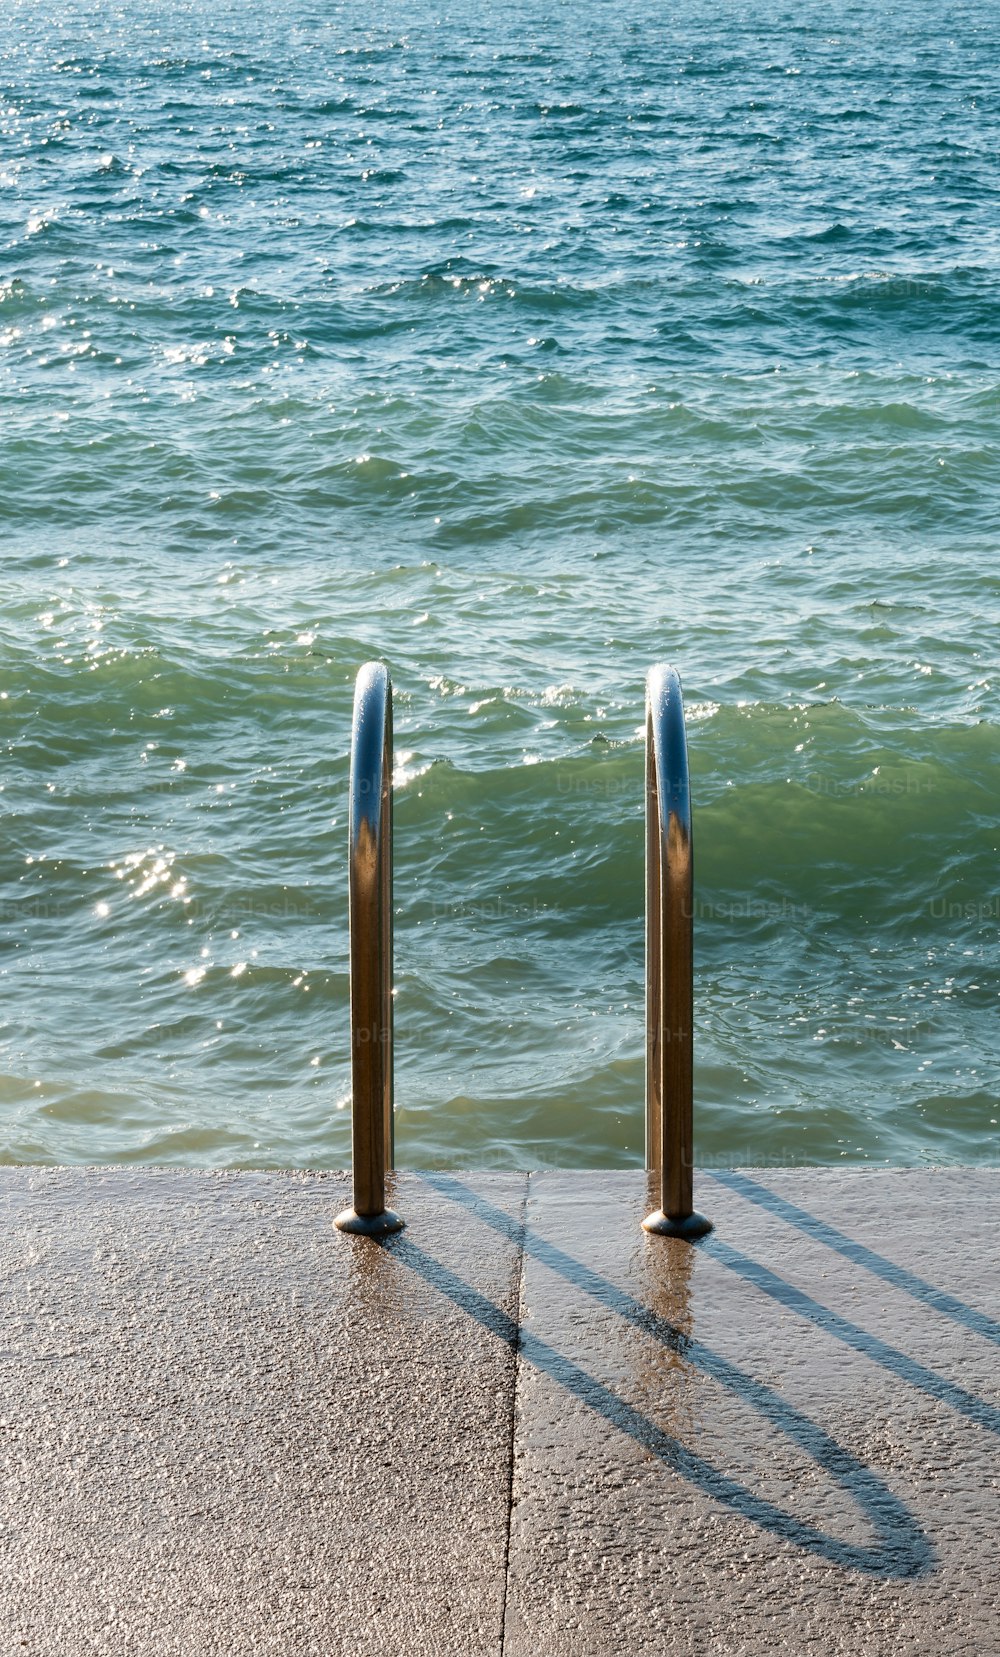 a pair of metal poles sitting next to a body of water